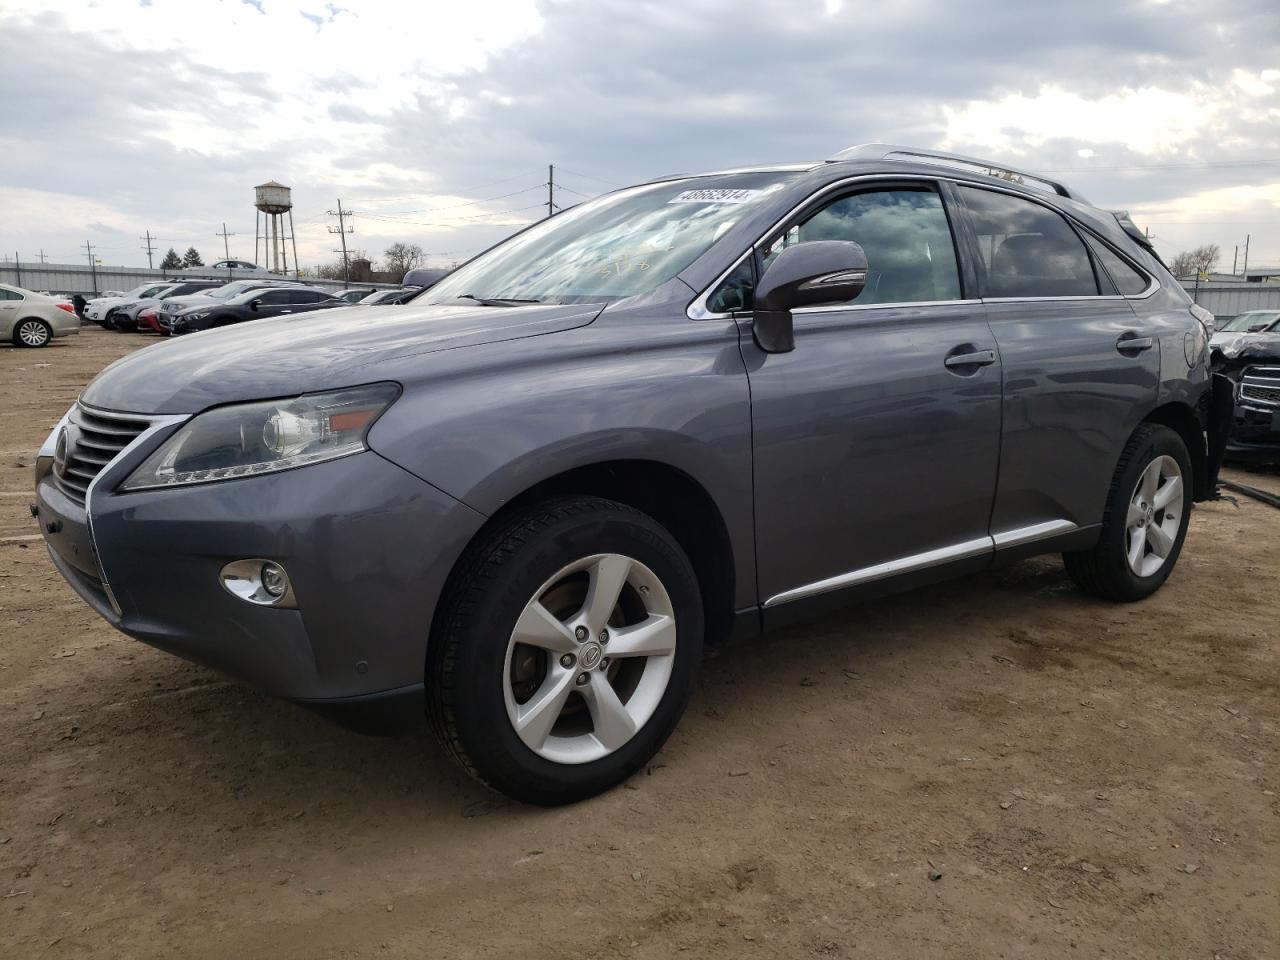 vin: 2T2BK1BA4FC295015 2T2BK1BA4FC295015 2015 lexus rx 3500 for Sale in 60411 5546, Il - Chicago South, Chicago Heights, Illinois, USA